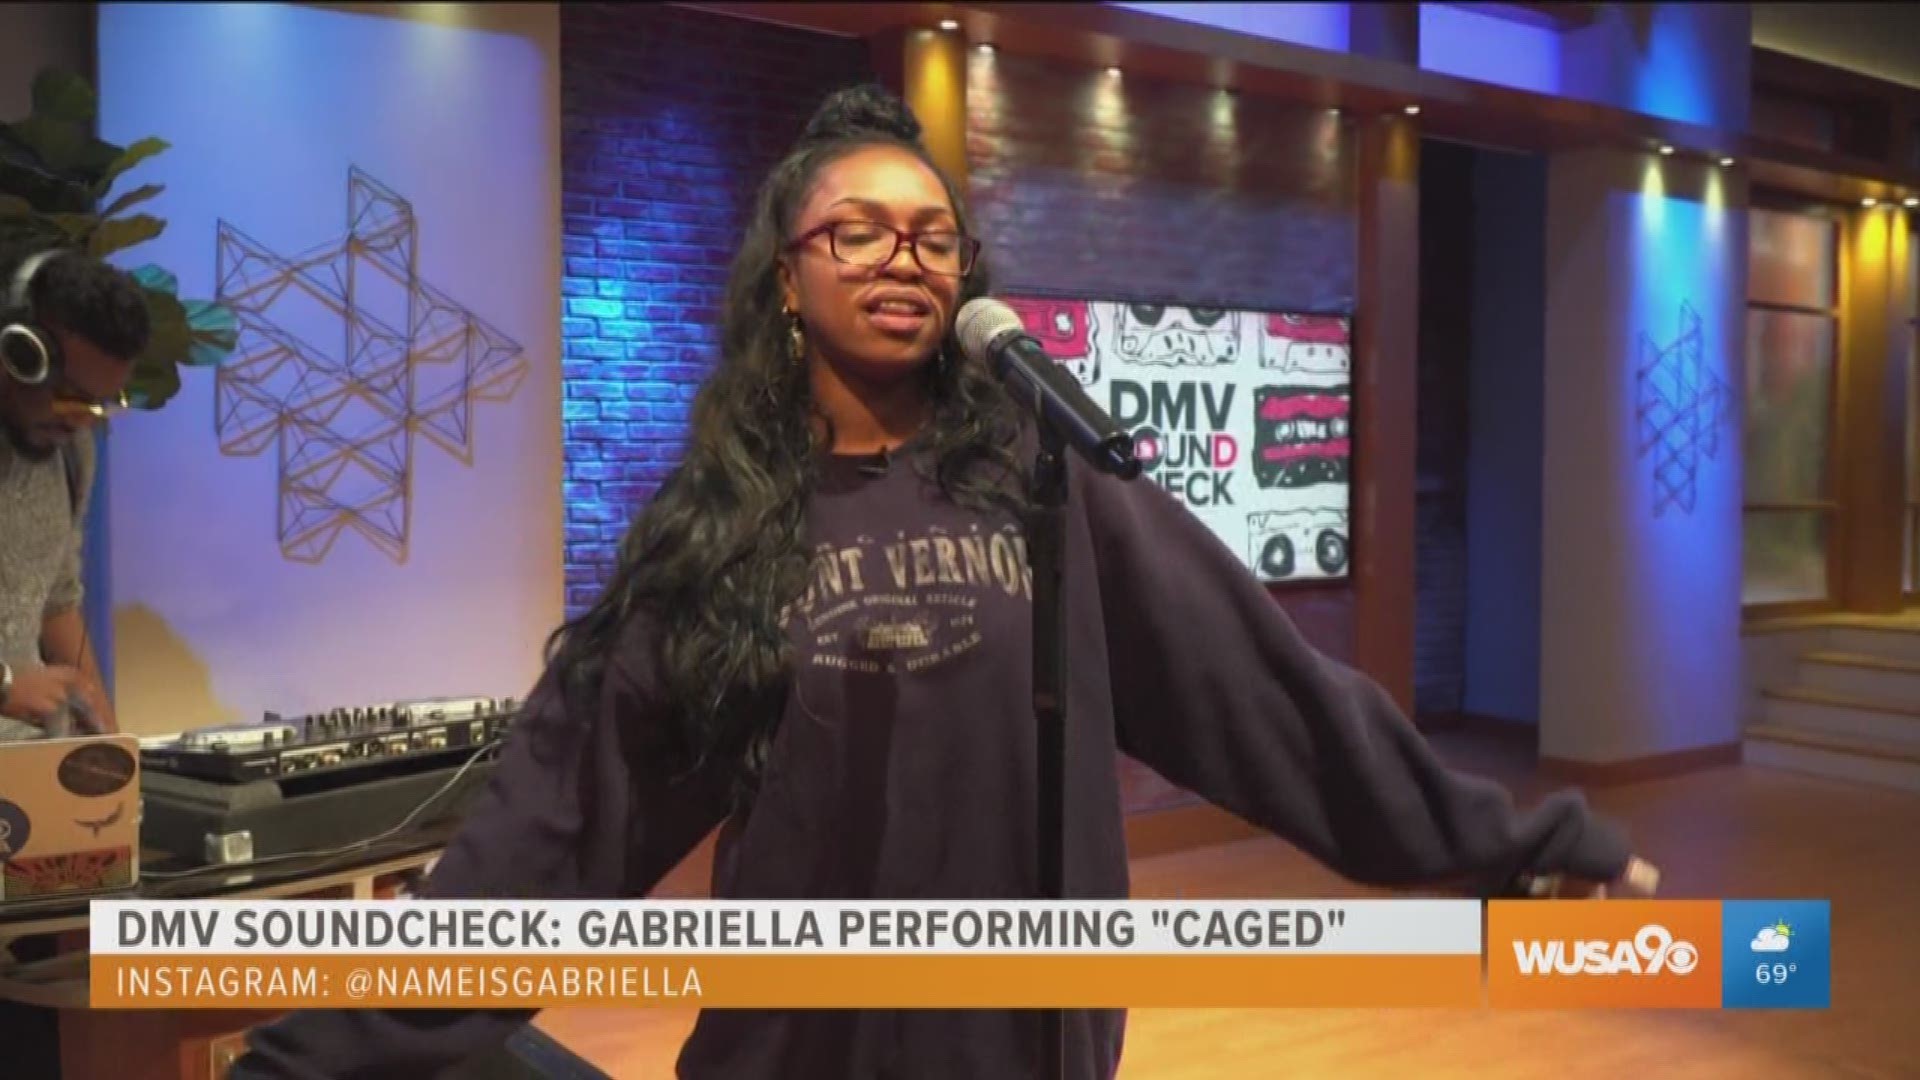 For this week's DMV Soundcheck performance, Gabriella illuminates the Great Day stage as she performs her single "Caged". This segment was sponsored by DC OCTFME.